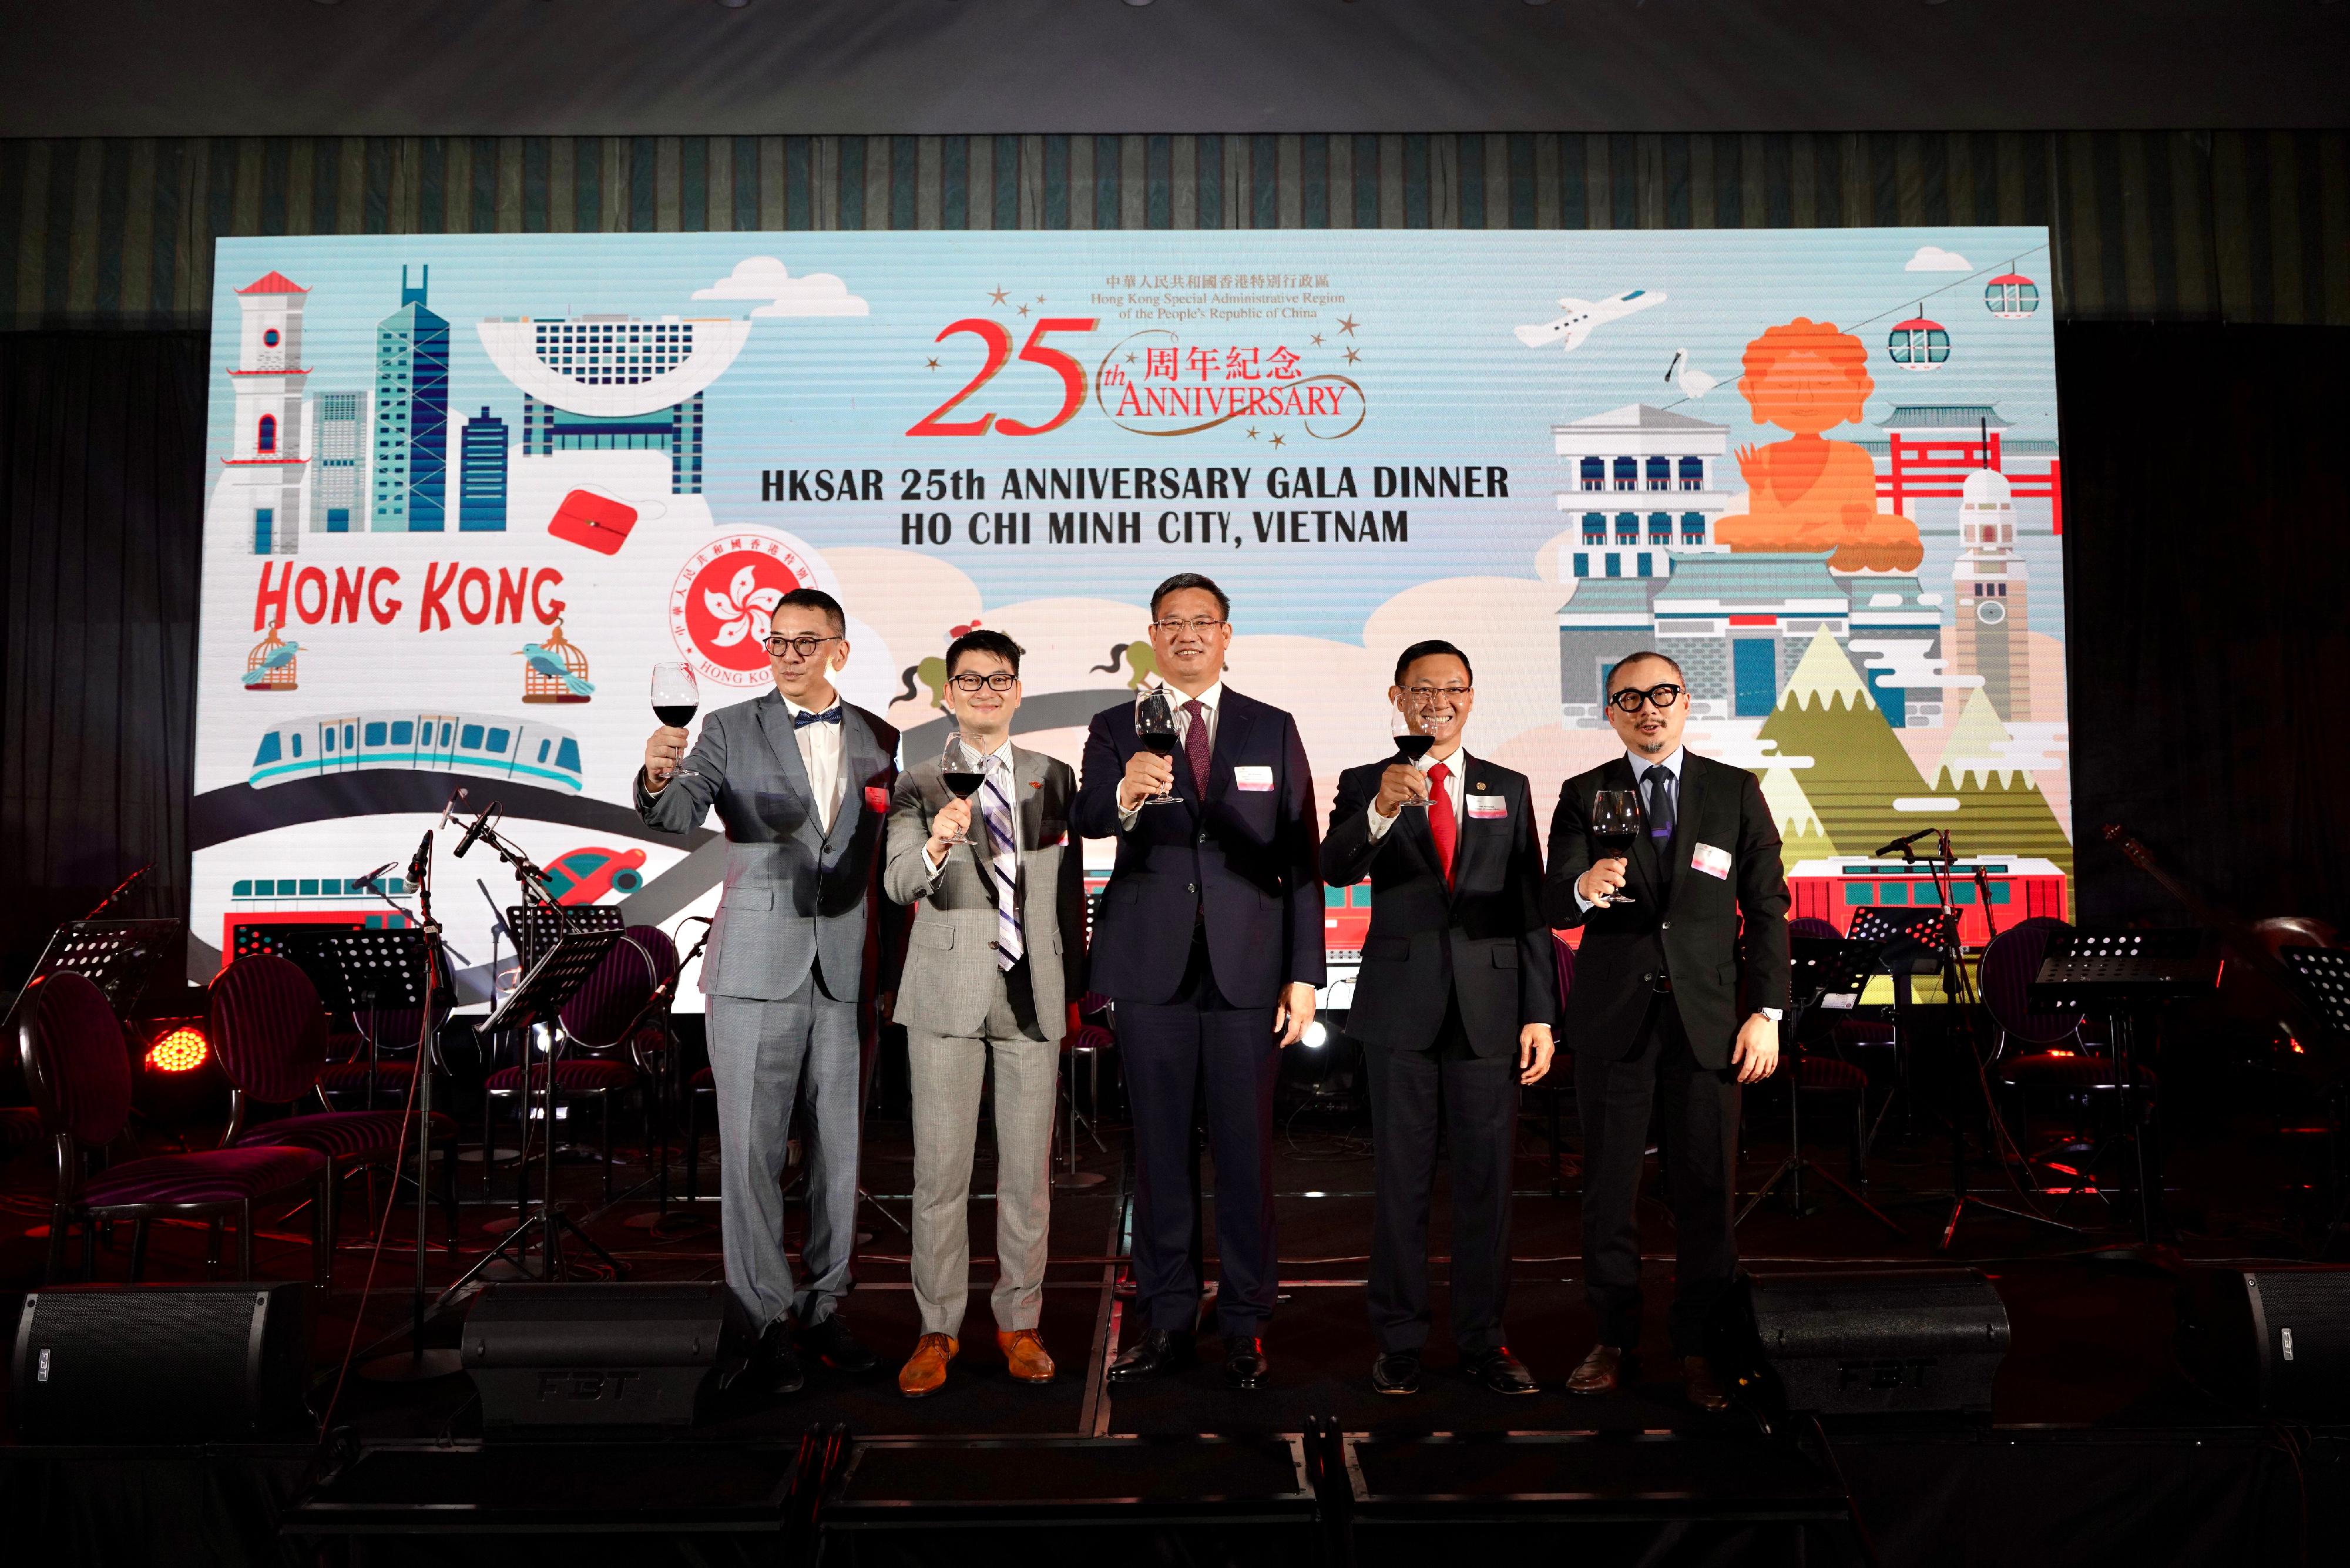 The Hong Kong Economic and Trade Office in Singapore hosted a gala dinner in Ho Chi Minh City, Vietnam today (August 27) in celebration of the 25th anniversary of the establishment of the Hong Kong Special Administrative Region. Photo shows the Director of the Singapore ETO, Mr Wong Chun To (second left); the Regional Director of Southeast Asia and South Asia of the Hong Kong Trade Development Council, Mr Peter Wong (first right); the Chairman of the Hong Kong Business Association Vietnam, Mr Michael Chiu (first left); the Director-General of Department of Foreign Affairs in Ho Chi Minh City under the Ministry of Foreign Affairs of Vietnam, Mr Tran Phuoc Anh  (second right); and the Chinese Consul General in Ho Chi Minh City, Mr Wei Huaxiang (centre). 